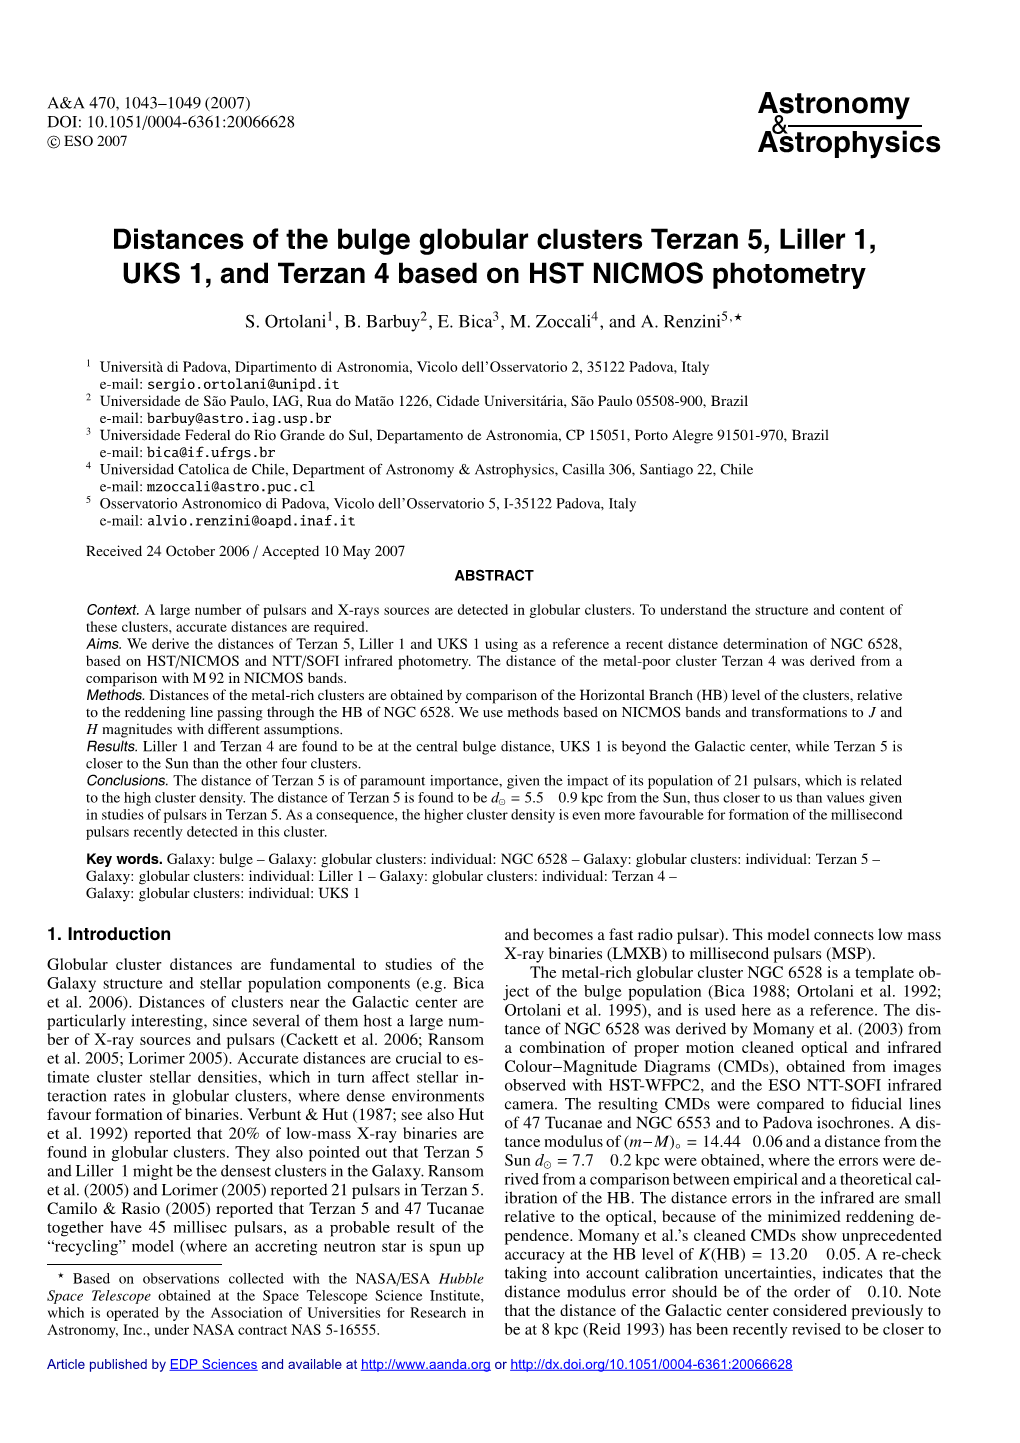 Distances of the Bulge Globular Clusters Terzan 5, Liller 1, UKS 1, and Terzan 4 Based on HST NICMOS Photometry